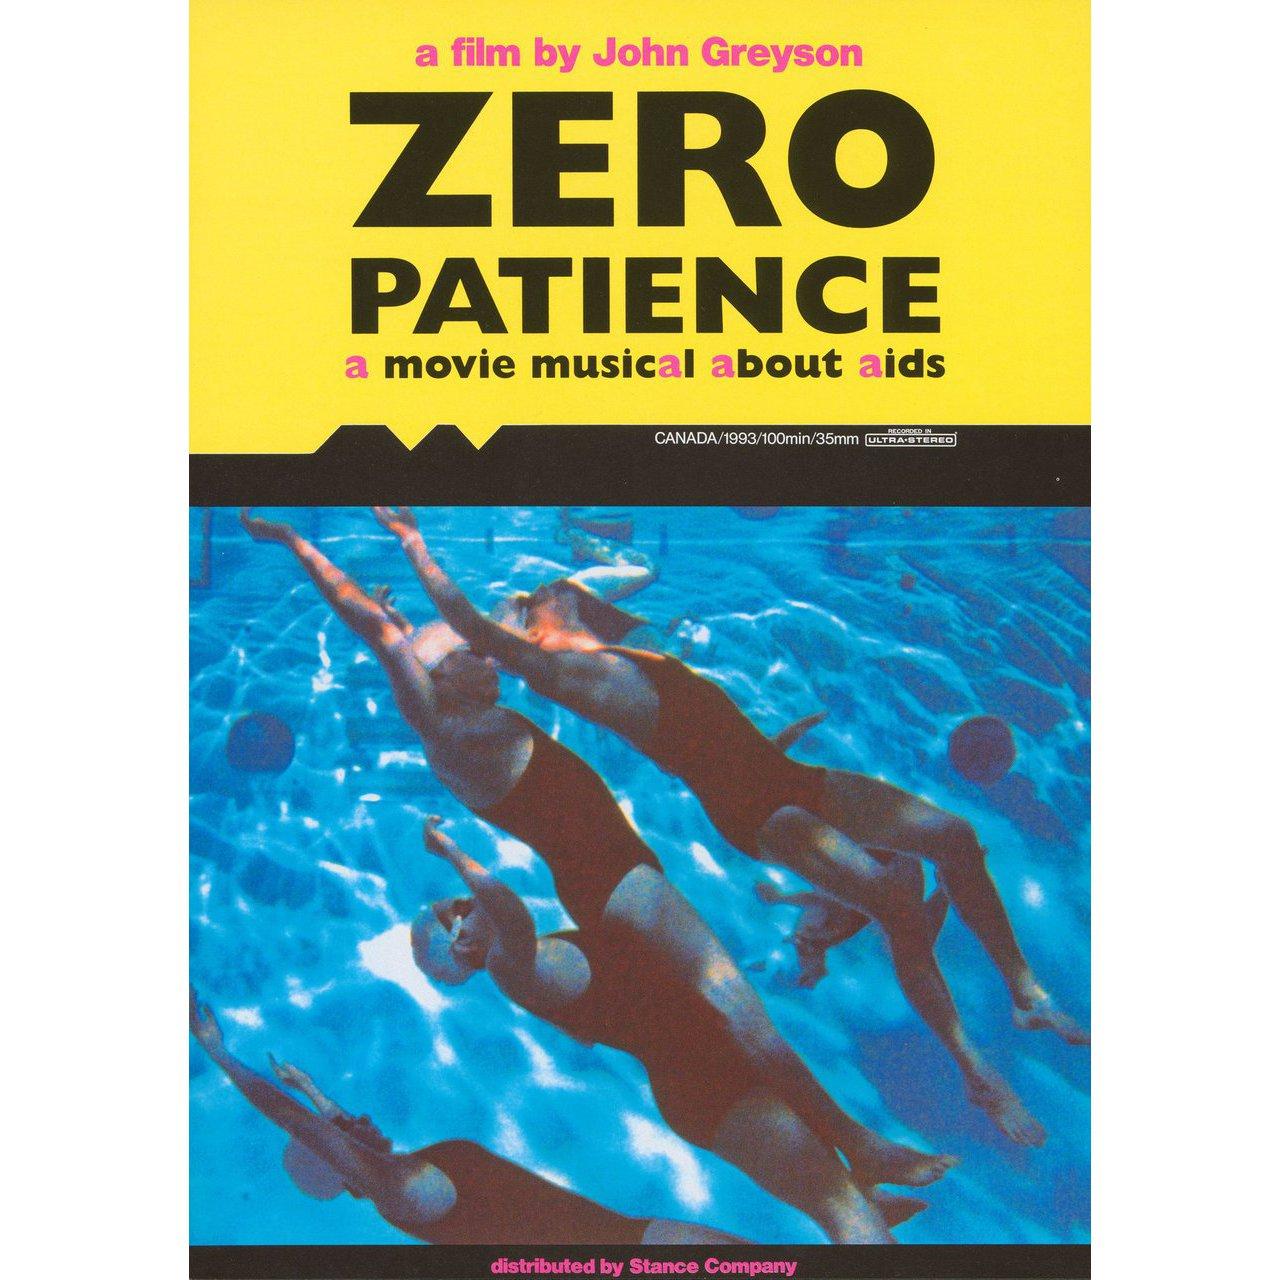 Original 1993 Japanese B2 poster for the film Zero Patience directed by John Greyson with John Robinson / Normand Fauteux / Dianne Heatherington / Richardo Keens-Douglas. Very Good-Fine condition, rolled. Please note: the size is stated in inches